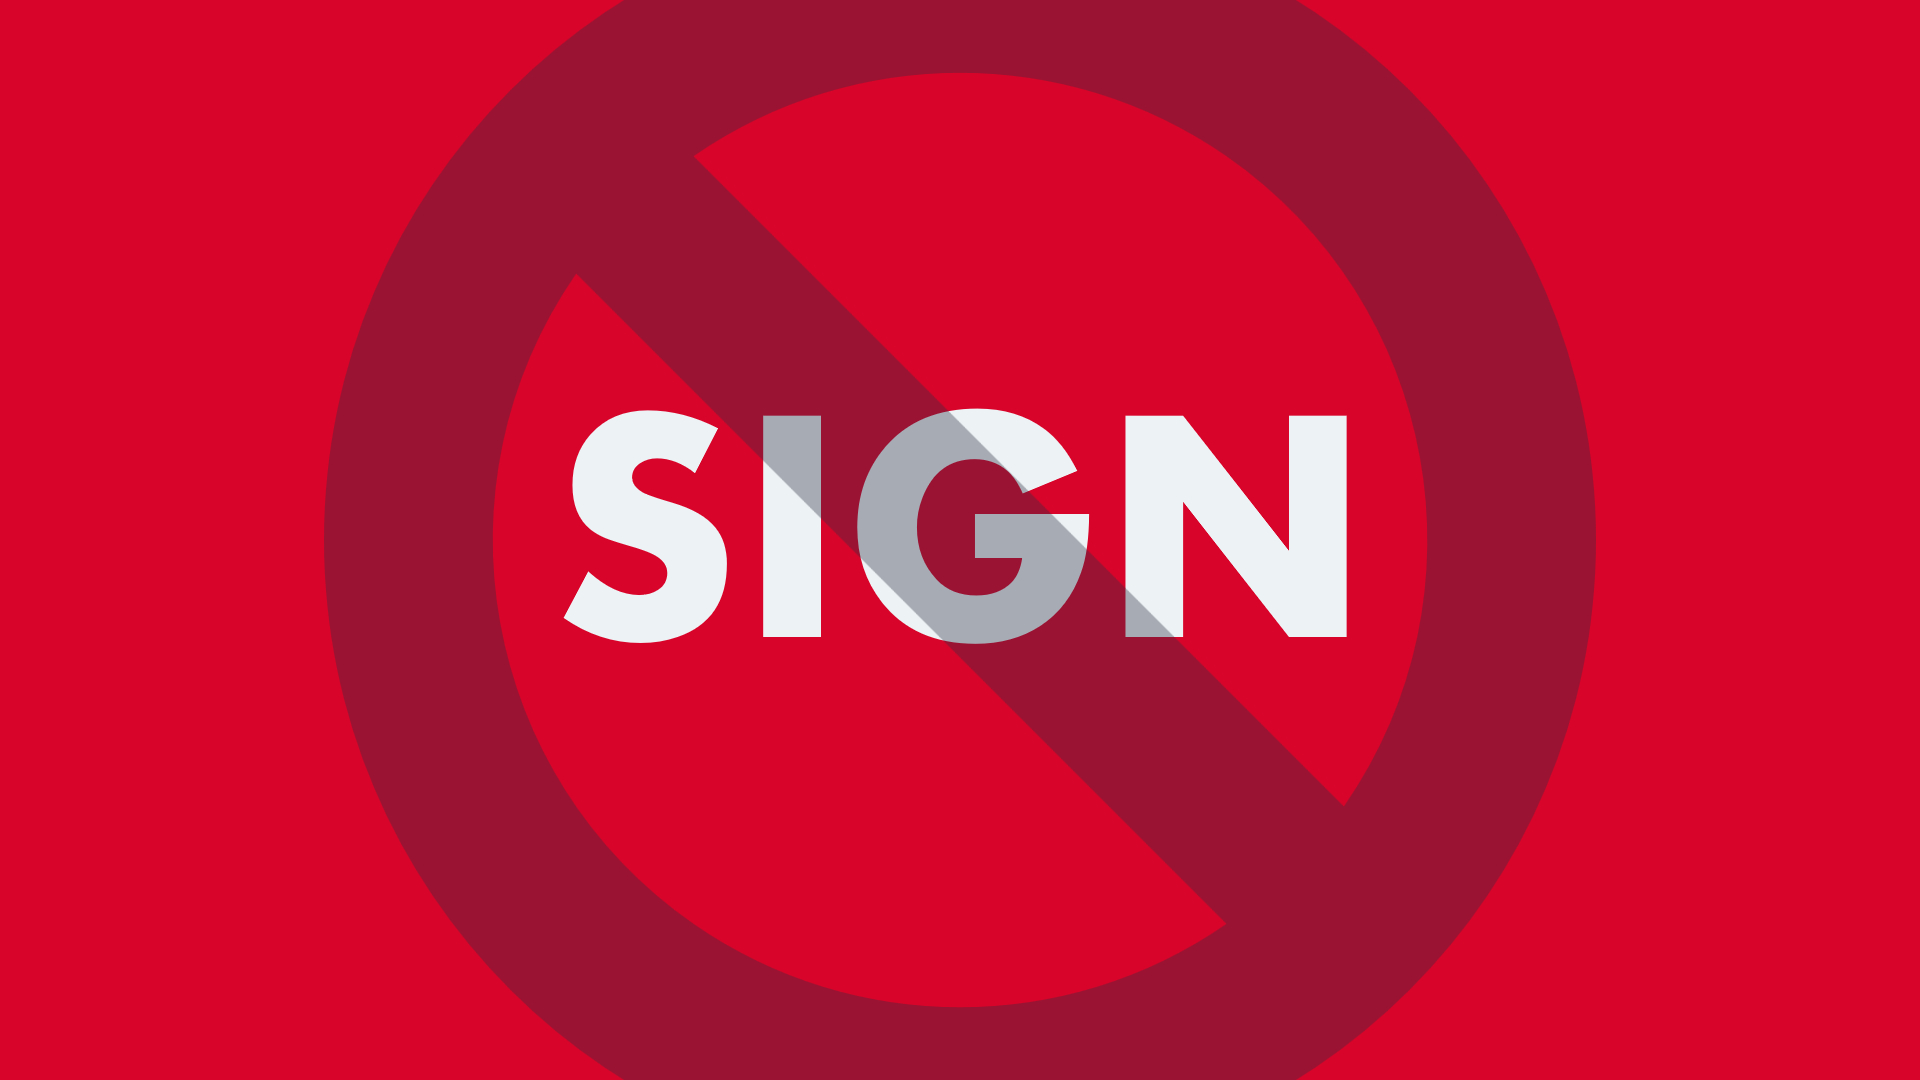 Don’t Signs